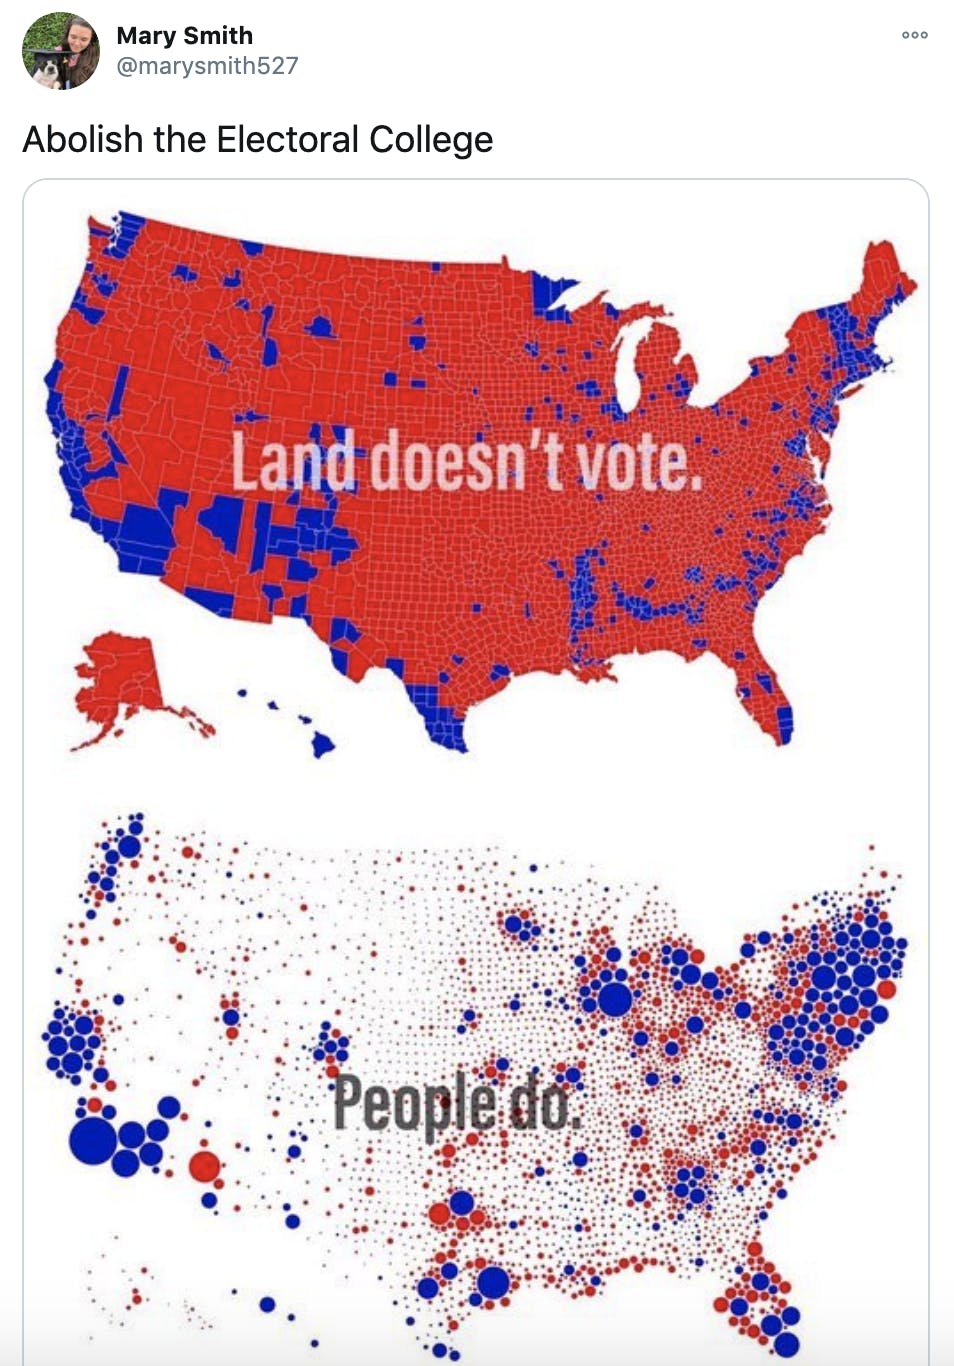 'Abolish the Electoral College ' two maps showing voting power vs population numbers and the slogan 'land doesn't vote'